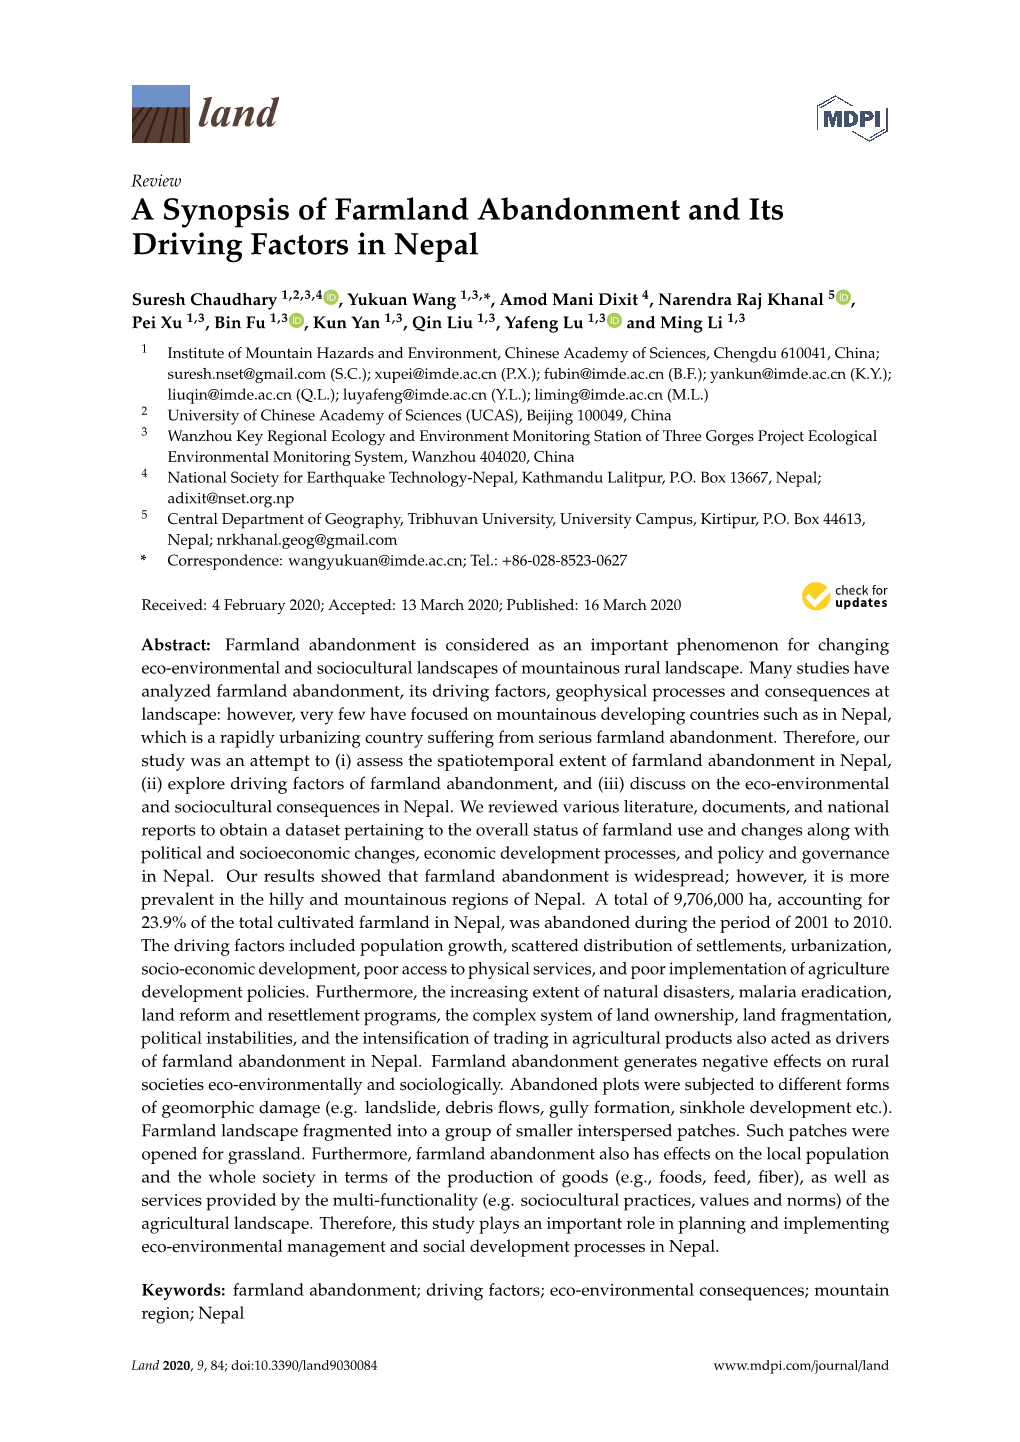 A Synopsis of Farmland Abandonment and Its Driving Factors in Nepal